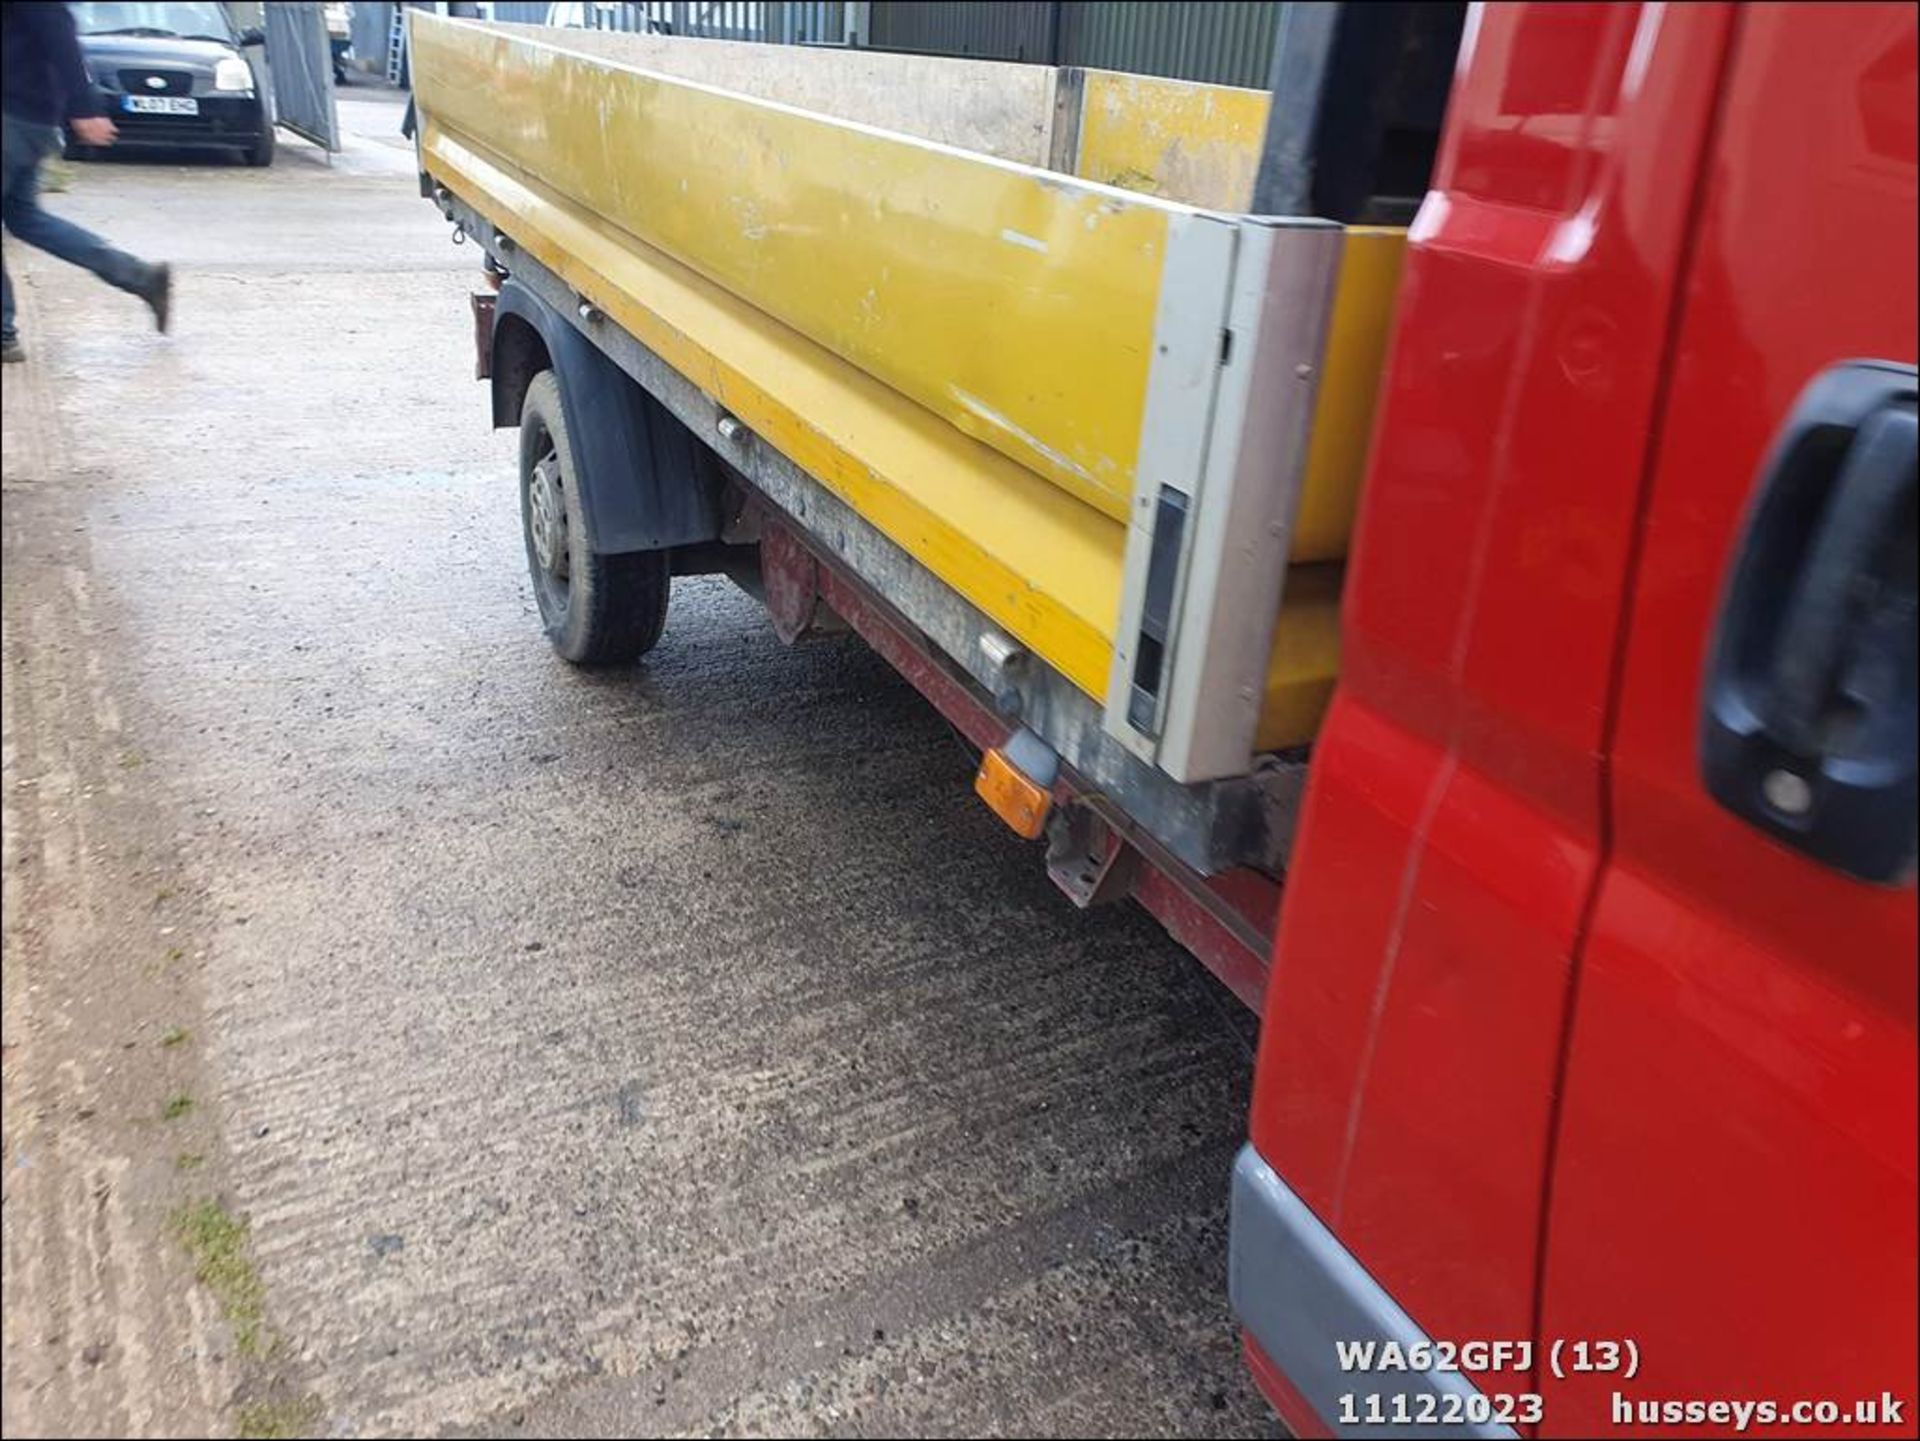 12/62 FIAT DUCATO 35 MULTIJET - 2287cc 2.dr Flat Bed (Red) - Image 14 of 52